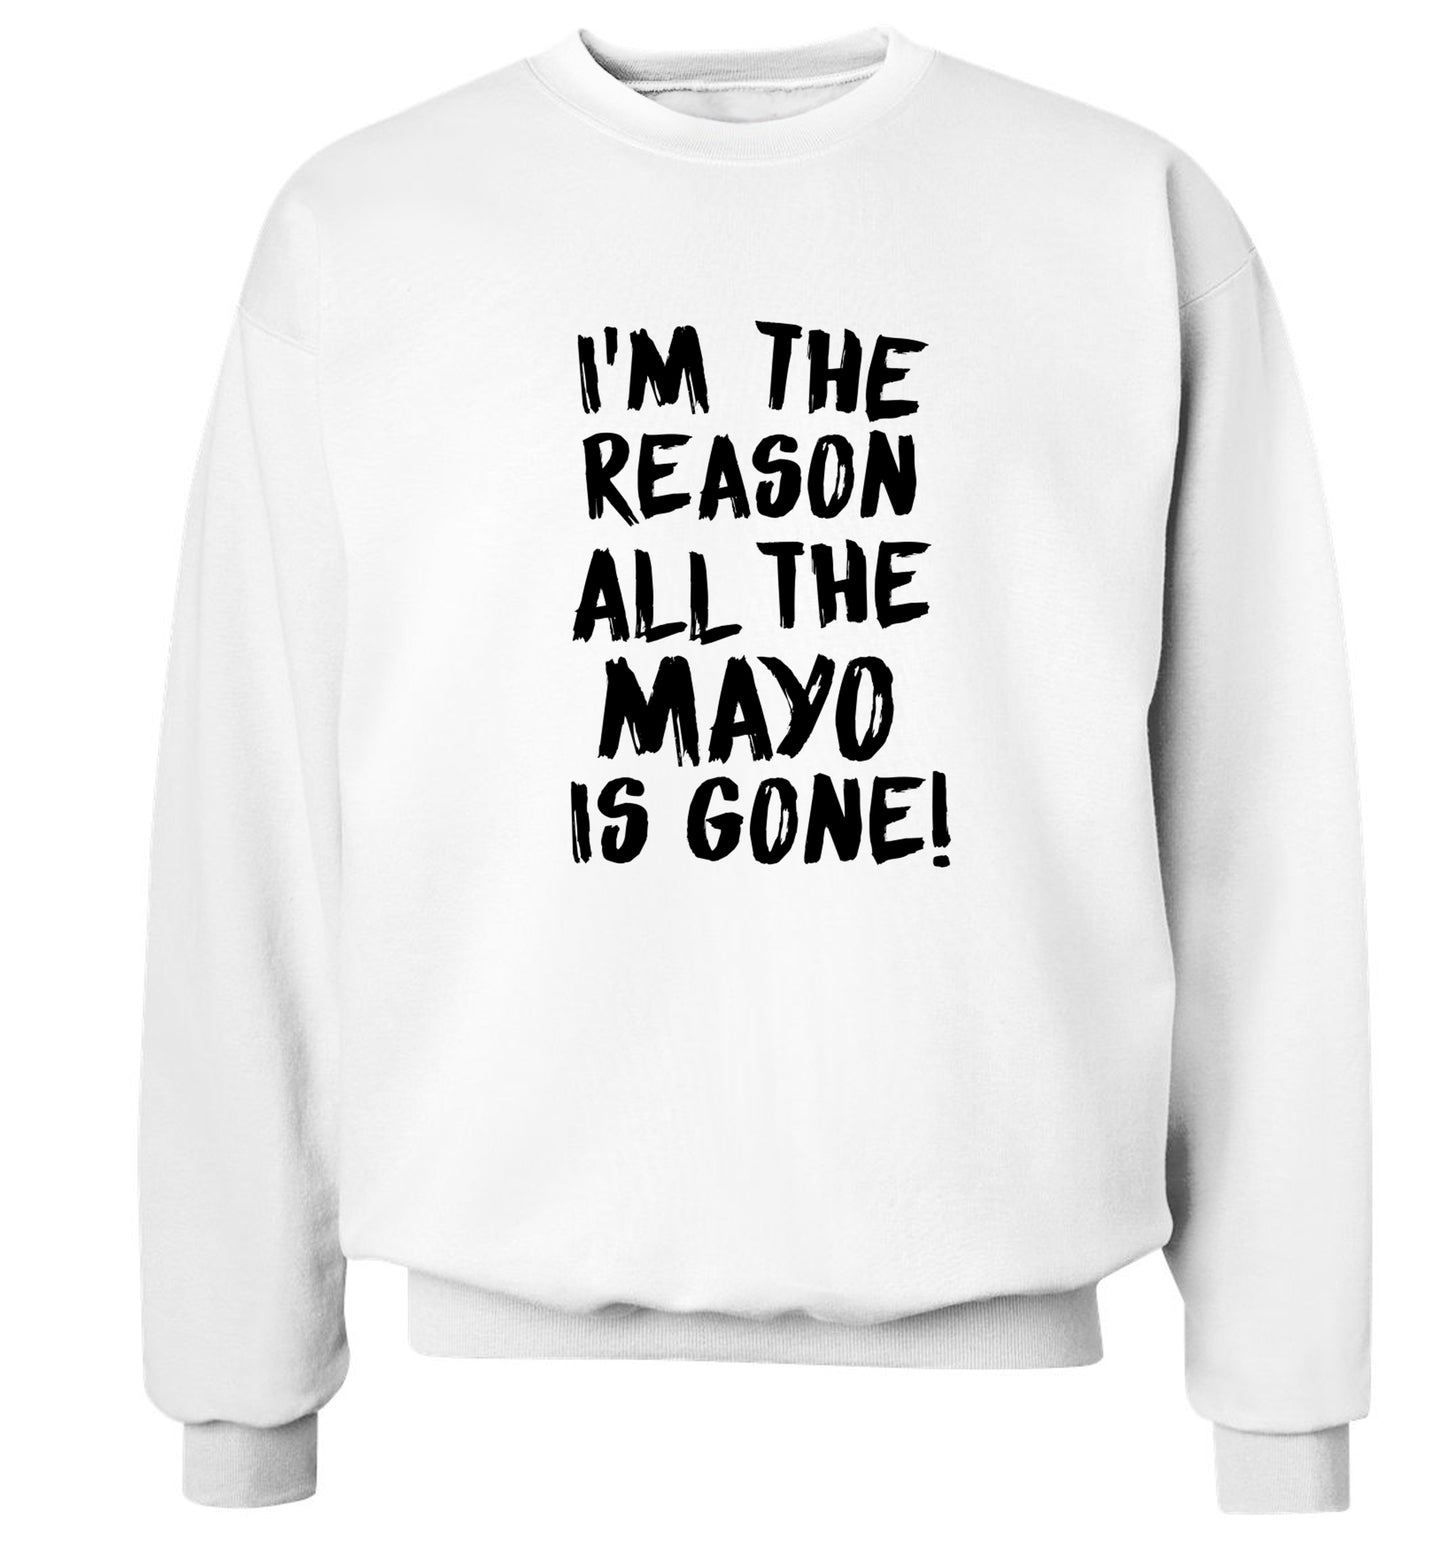 I'm the reason why all the mayo is gone Adult's unisex white Sweater 2XL